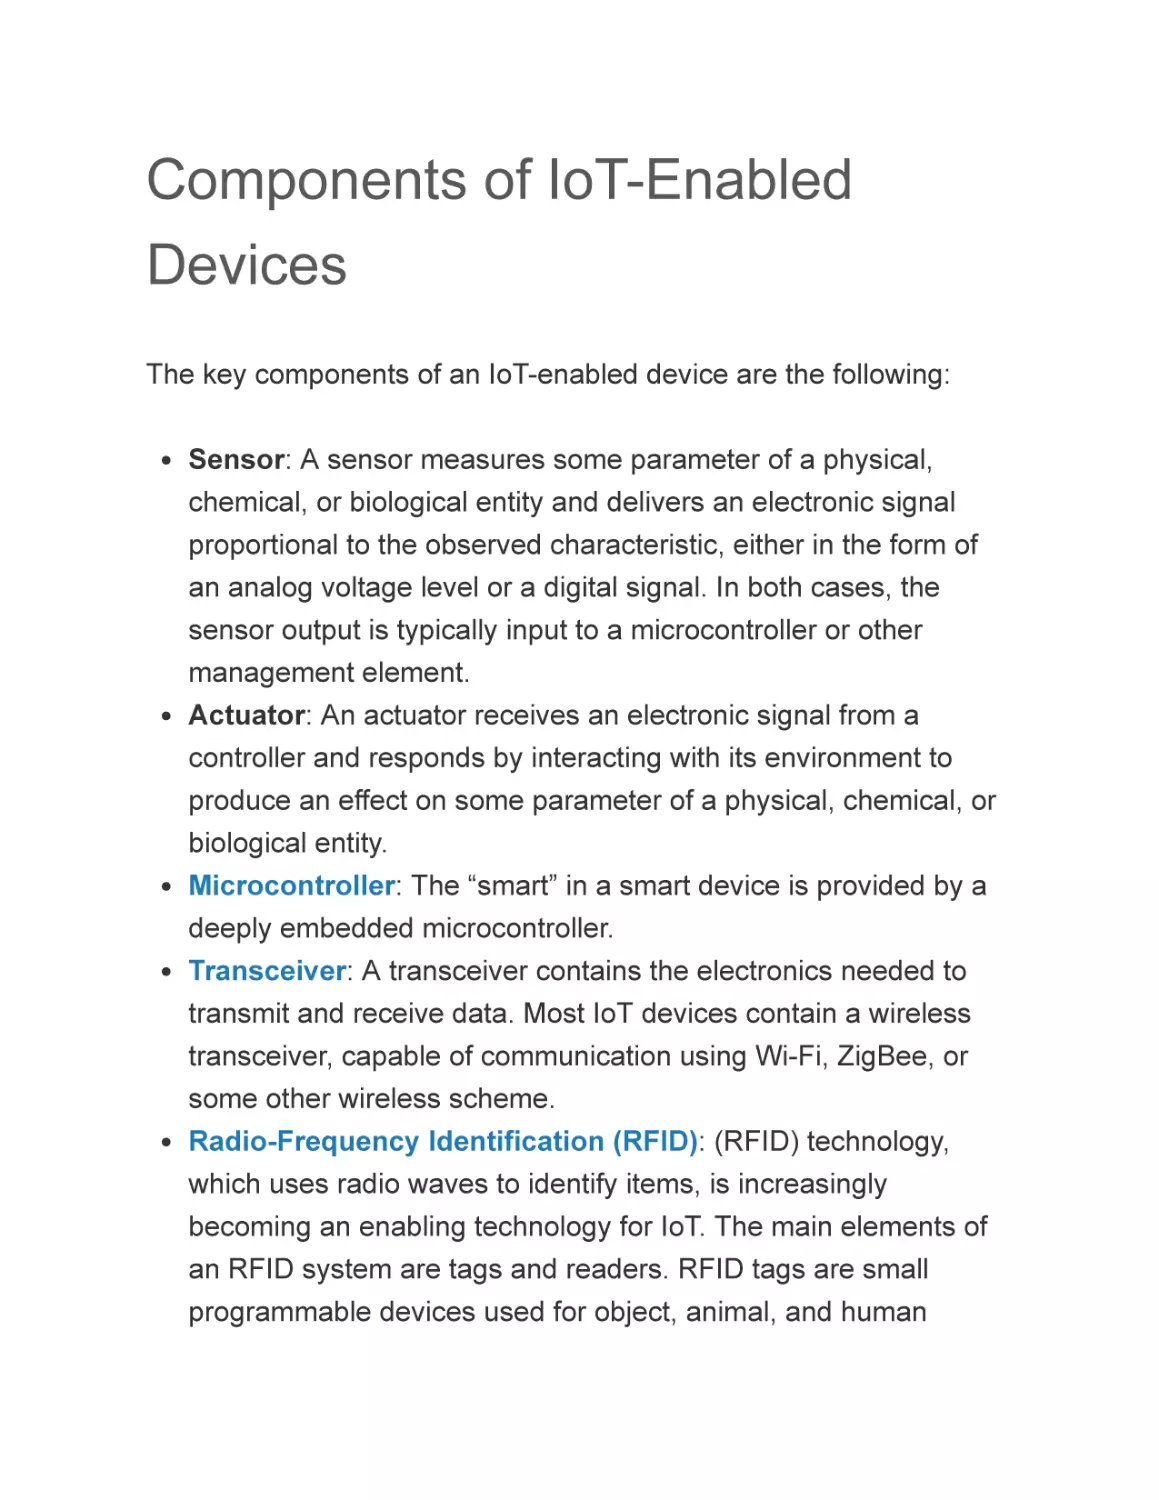 Components of IoT-Enabled Devices